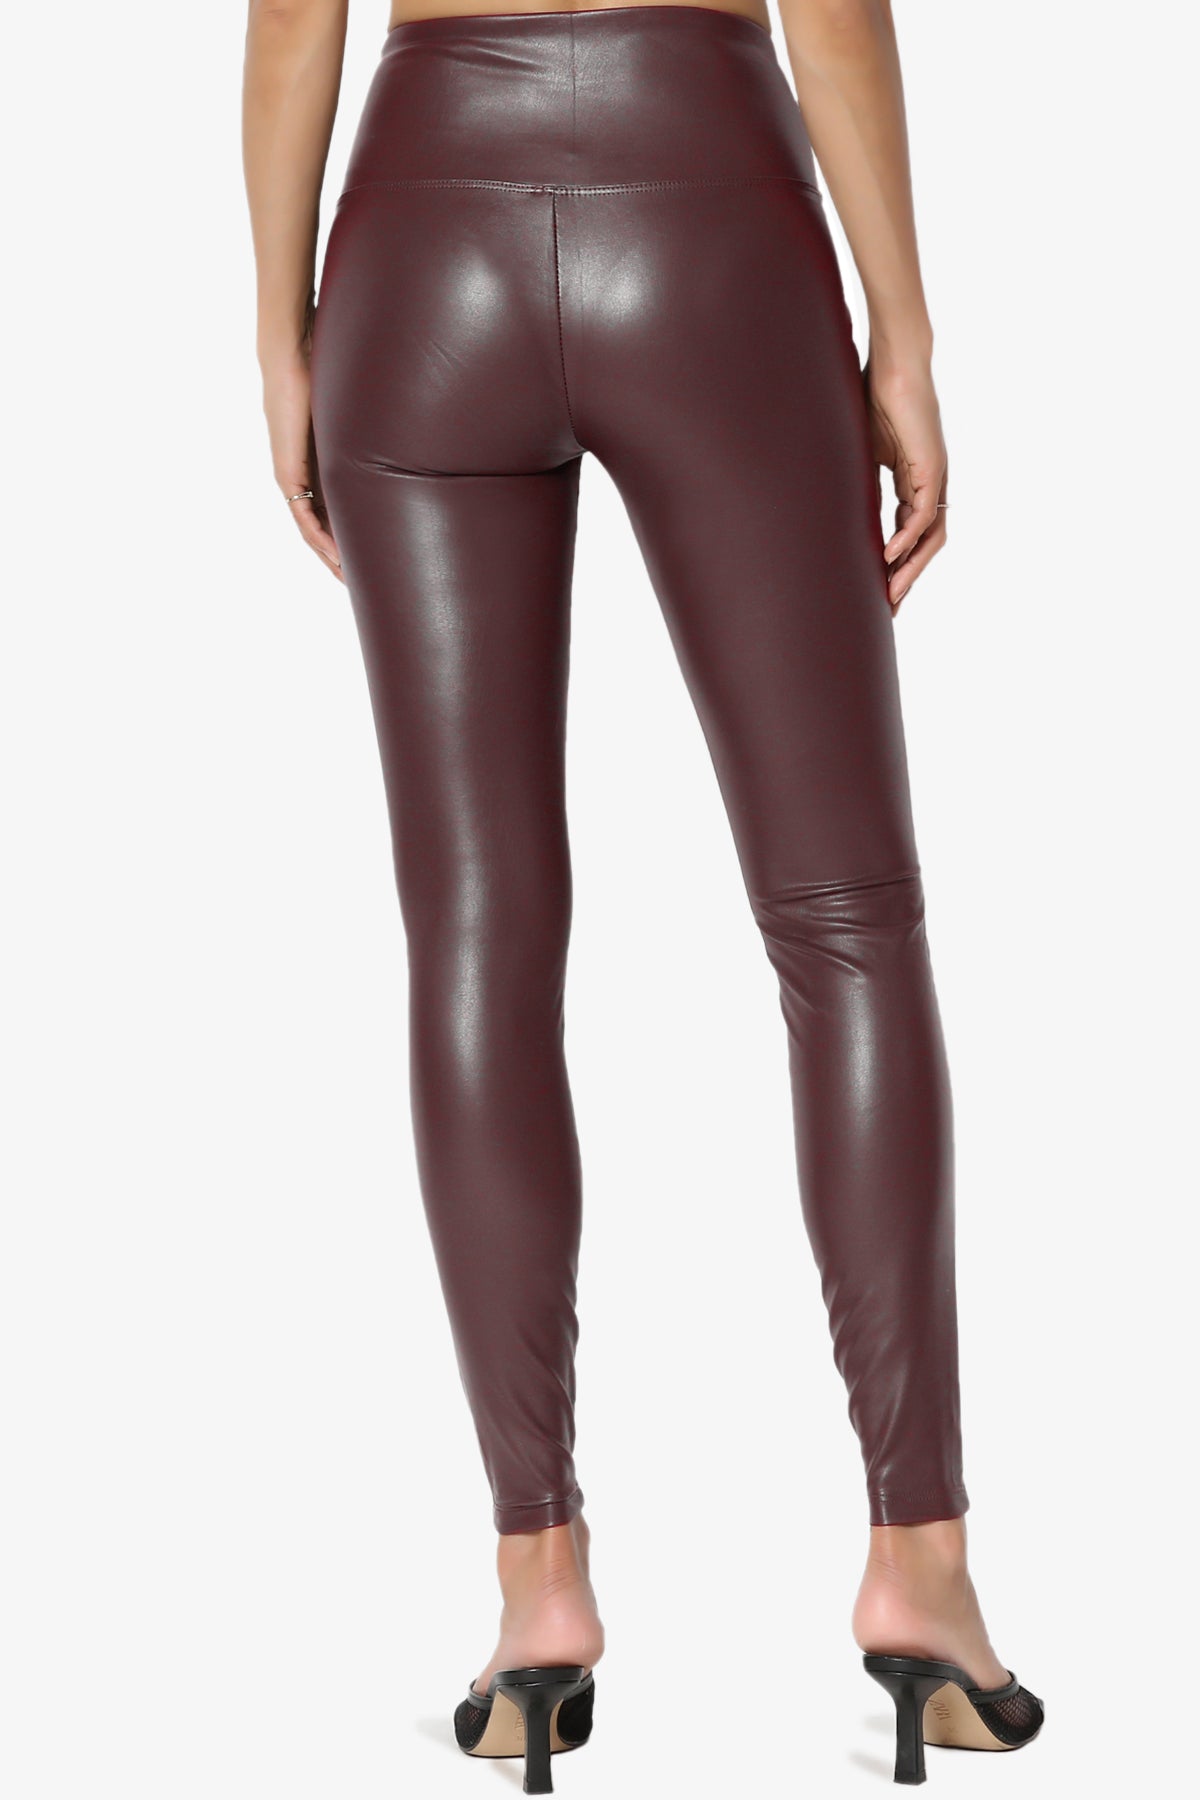 Sexy Stretchy Faux Leather Leggings Wide High Waist Tight Skinny Pants ...